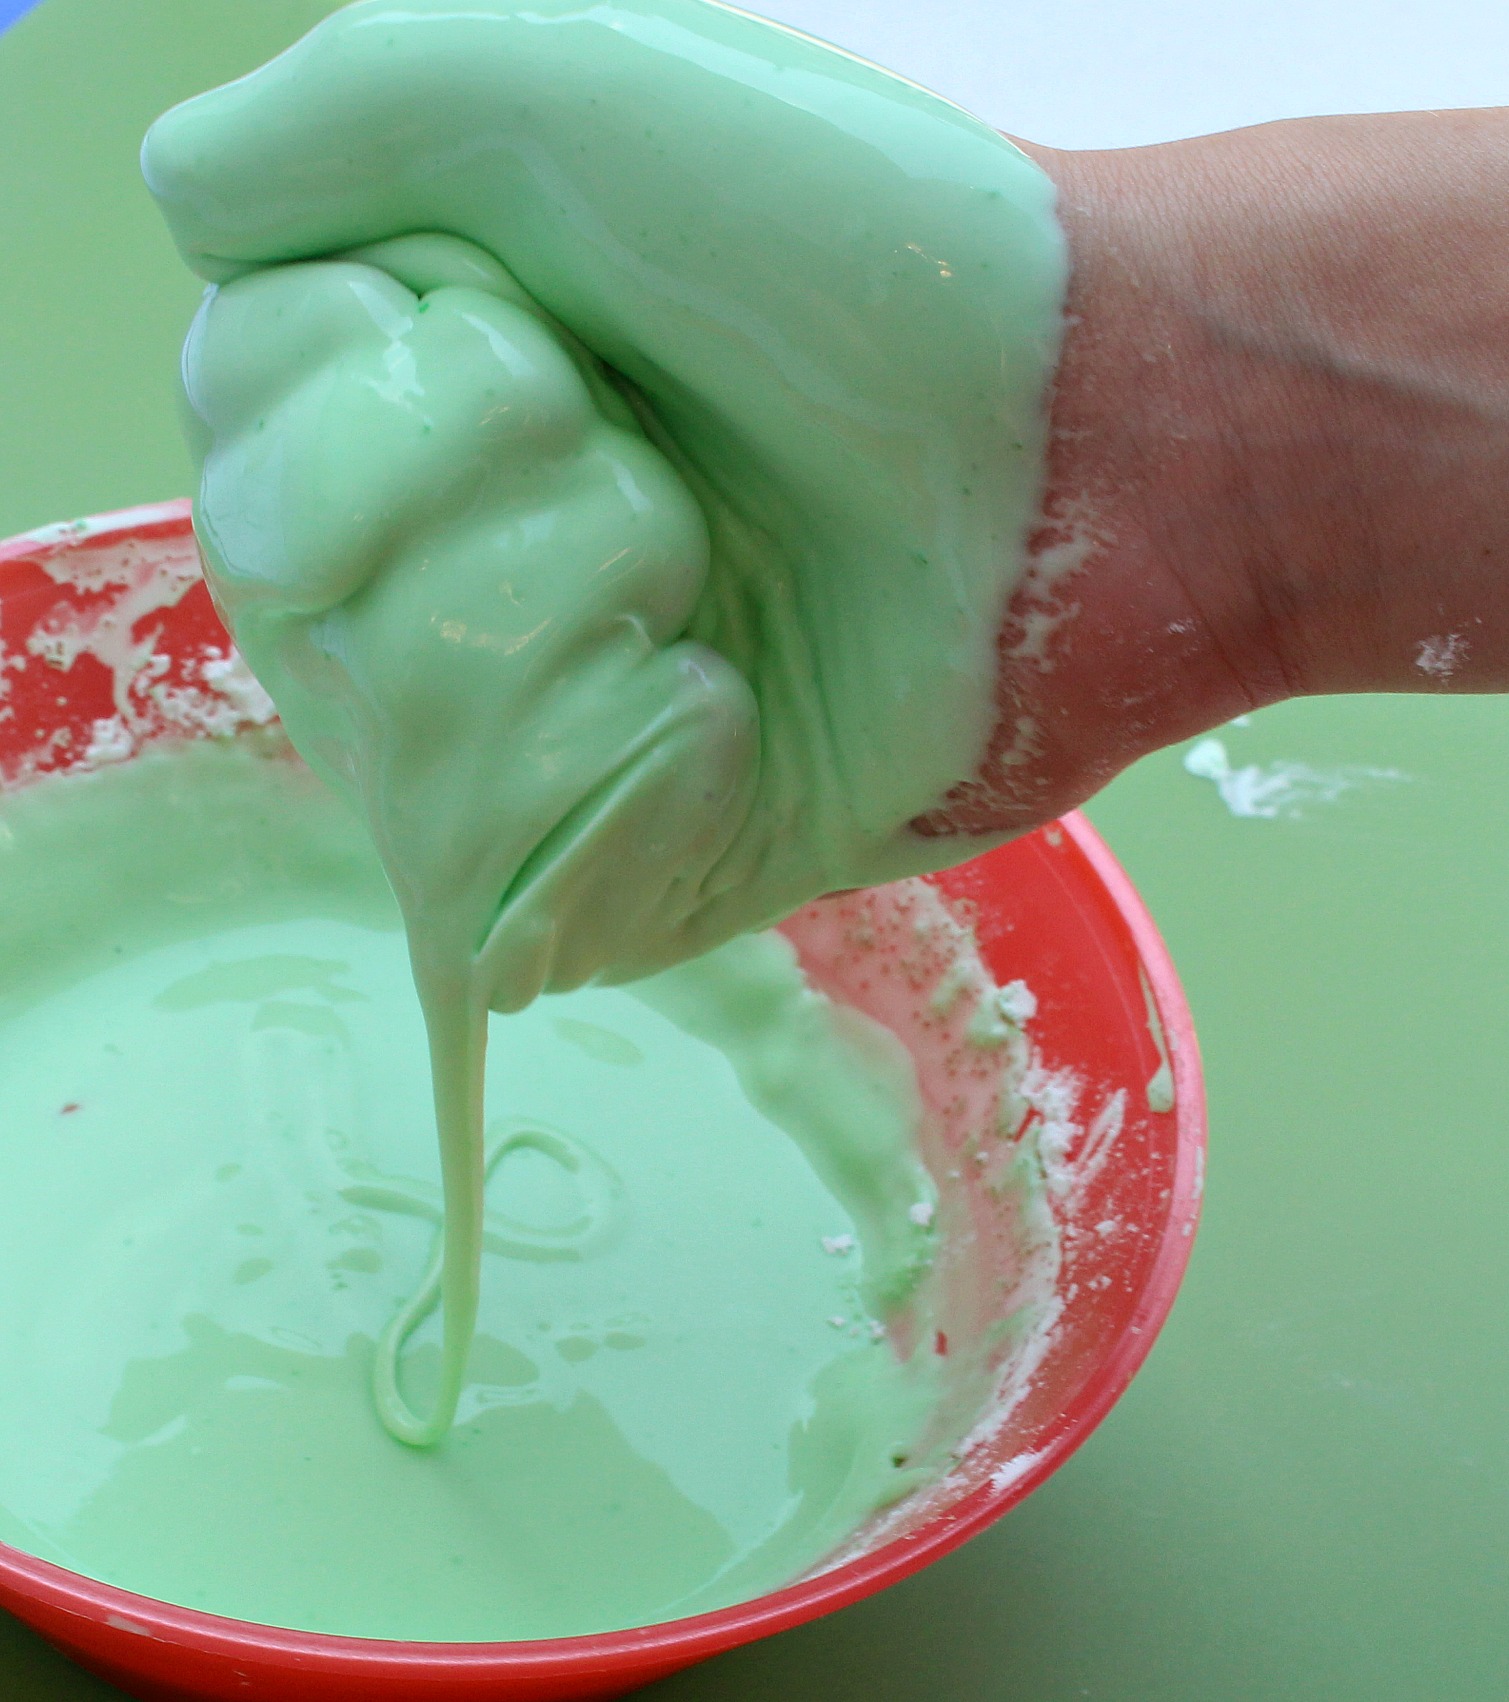 Exploring the Five Senses with Edible Jello Slime - Exploring how the slime feels in your hand.